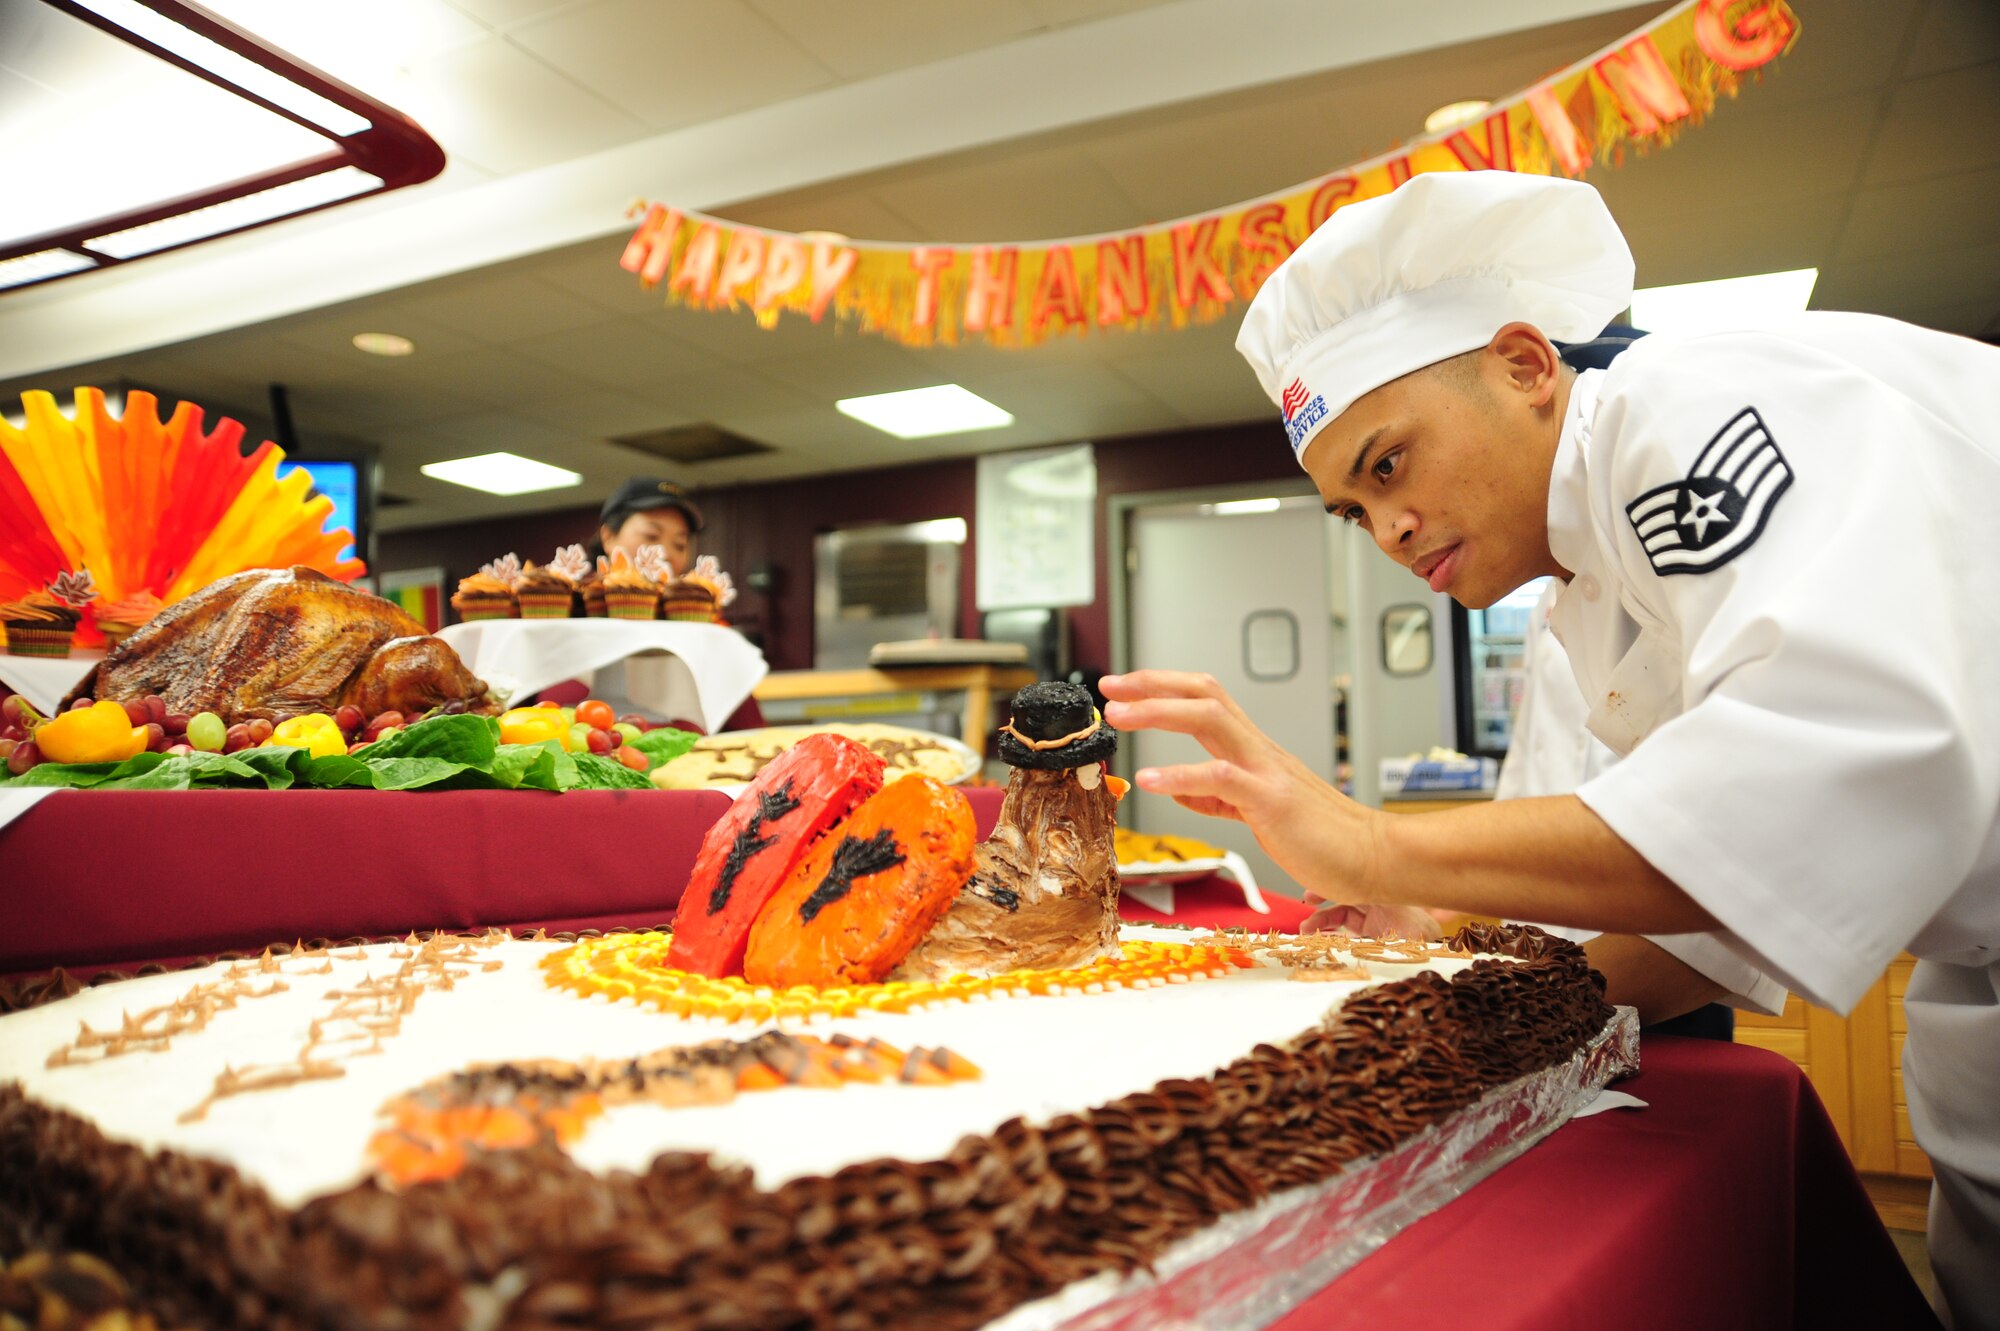 Staff Sgt. Jerry Calalang, 509th Force Support Squadron food services craftsman, applies the final touches to a Thanksgiving Day cake Nov. 22 at Whiteman Air Force Base, Mo. The dining facility served a special Thanksgiving Day meal to increase morale among Airmen and families on base. (U.S. Air Force photo/Senior Airman Nick Wilson) (Released)